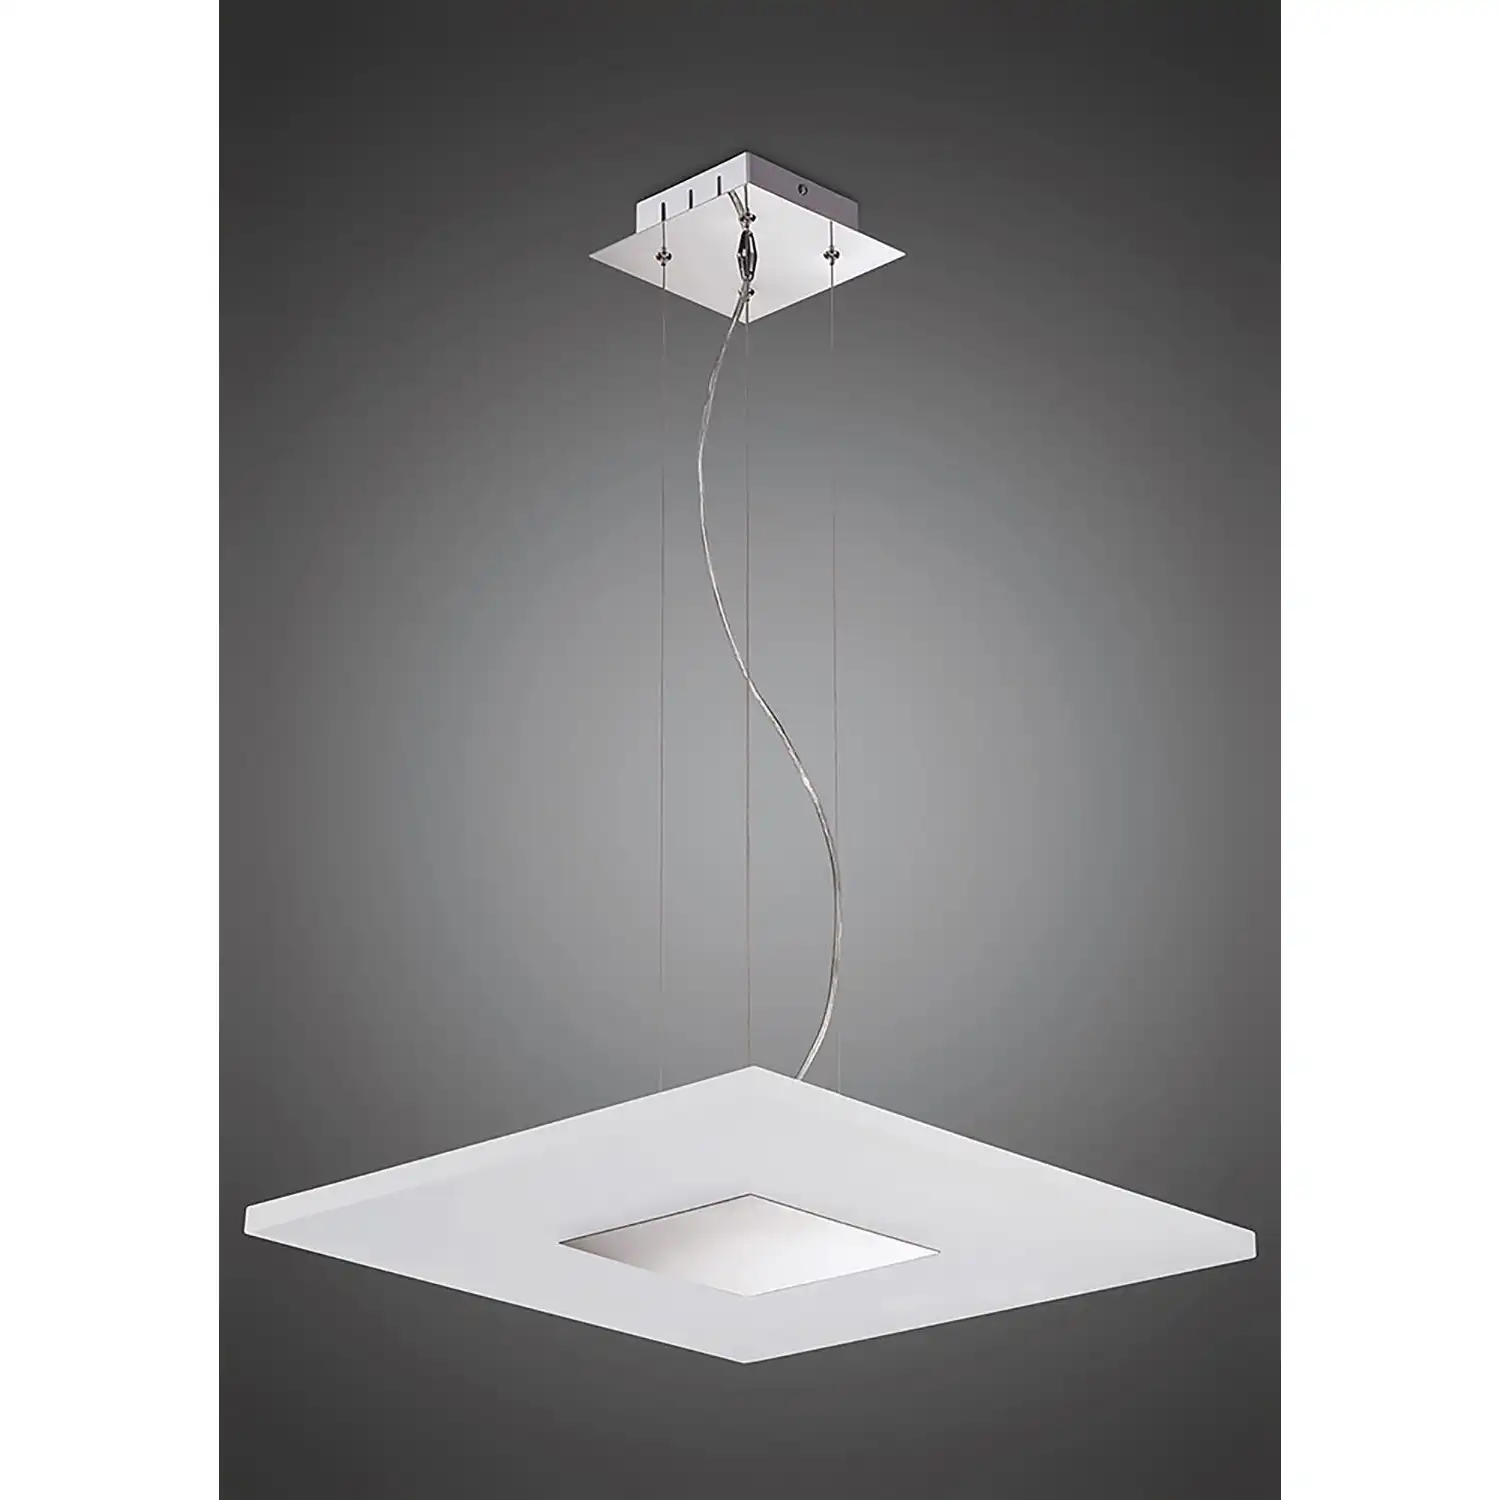 Notte Pendant 28W LED Square 3000K, 1700lm, Polished Chrome Frosted Acrylic, 3yrs Warranty